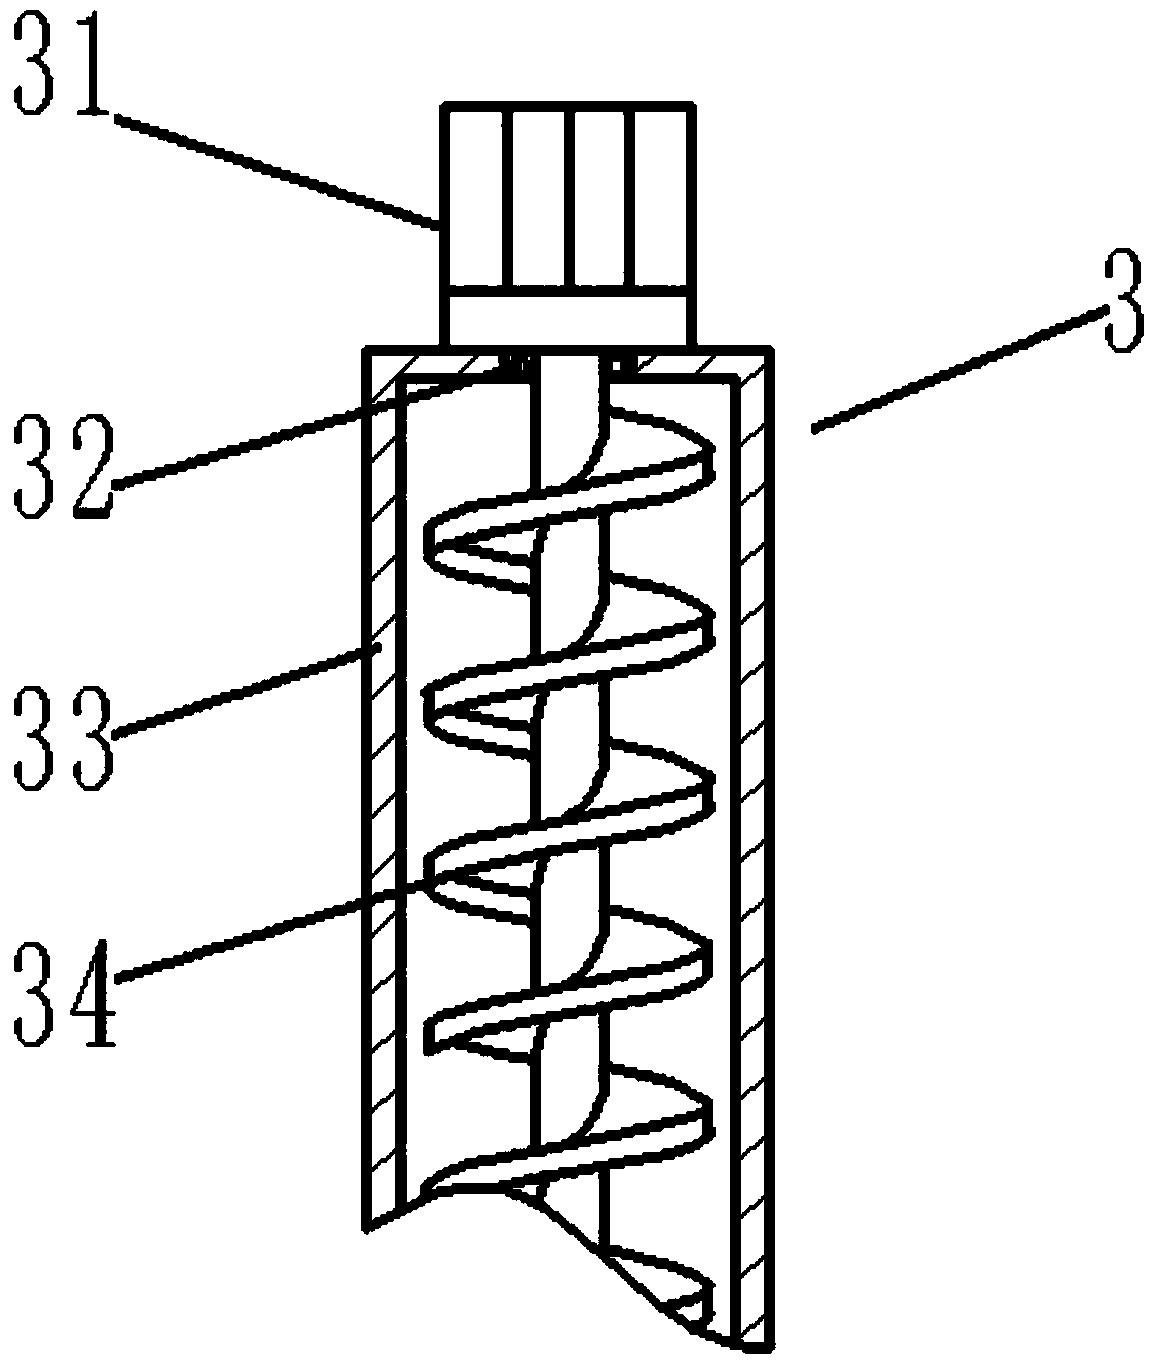 Pelletizing and screening integrated device for lithium ion battery cathode material